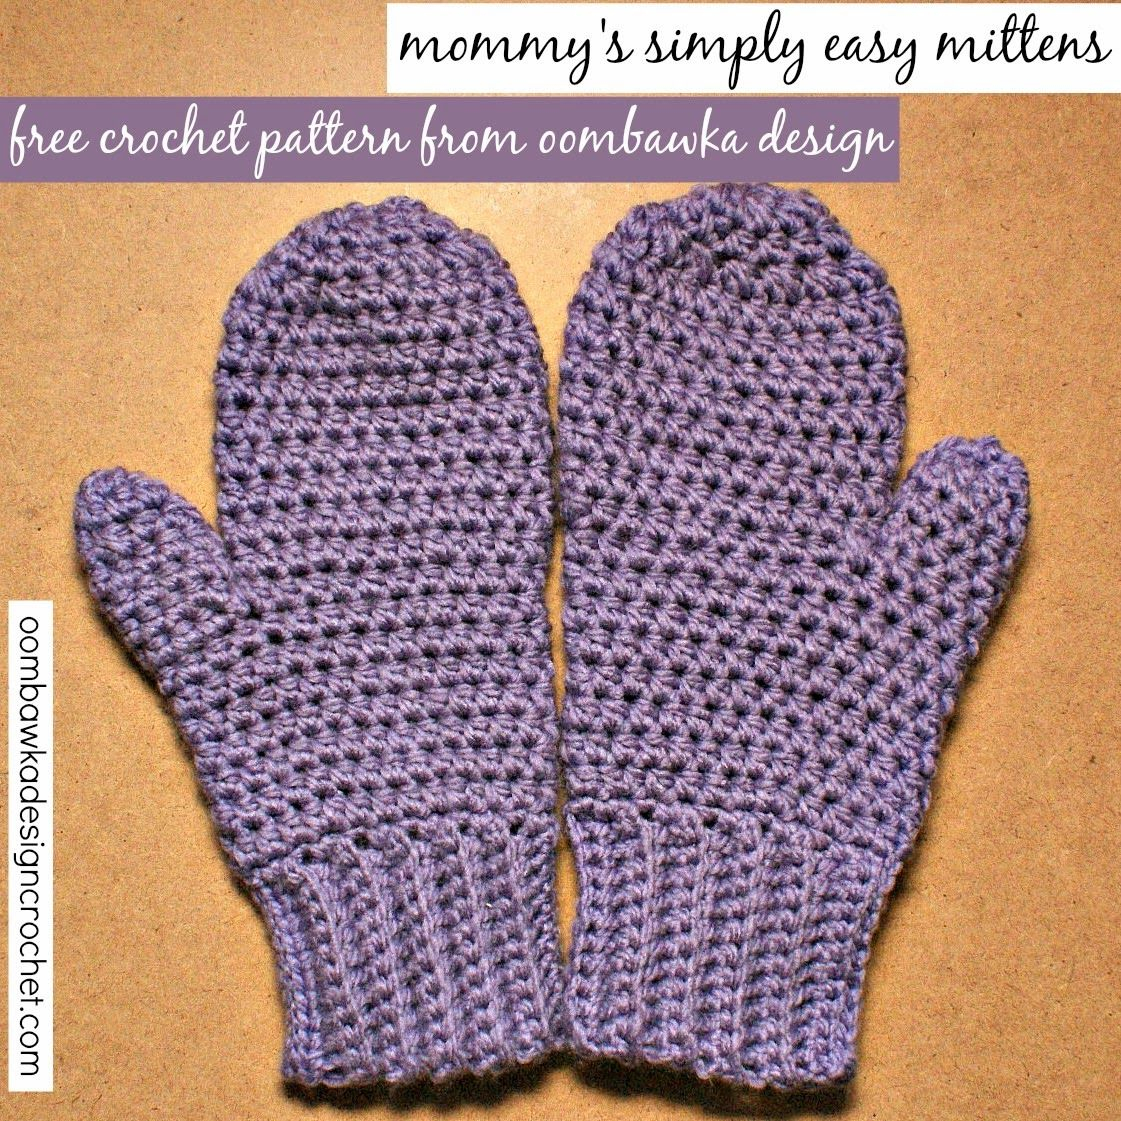 Crochet Mittens Free Pattern Mommys Simply Easy Mittens Crochet Crochet Mittens Crochet